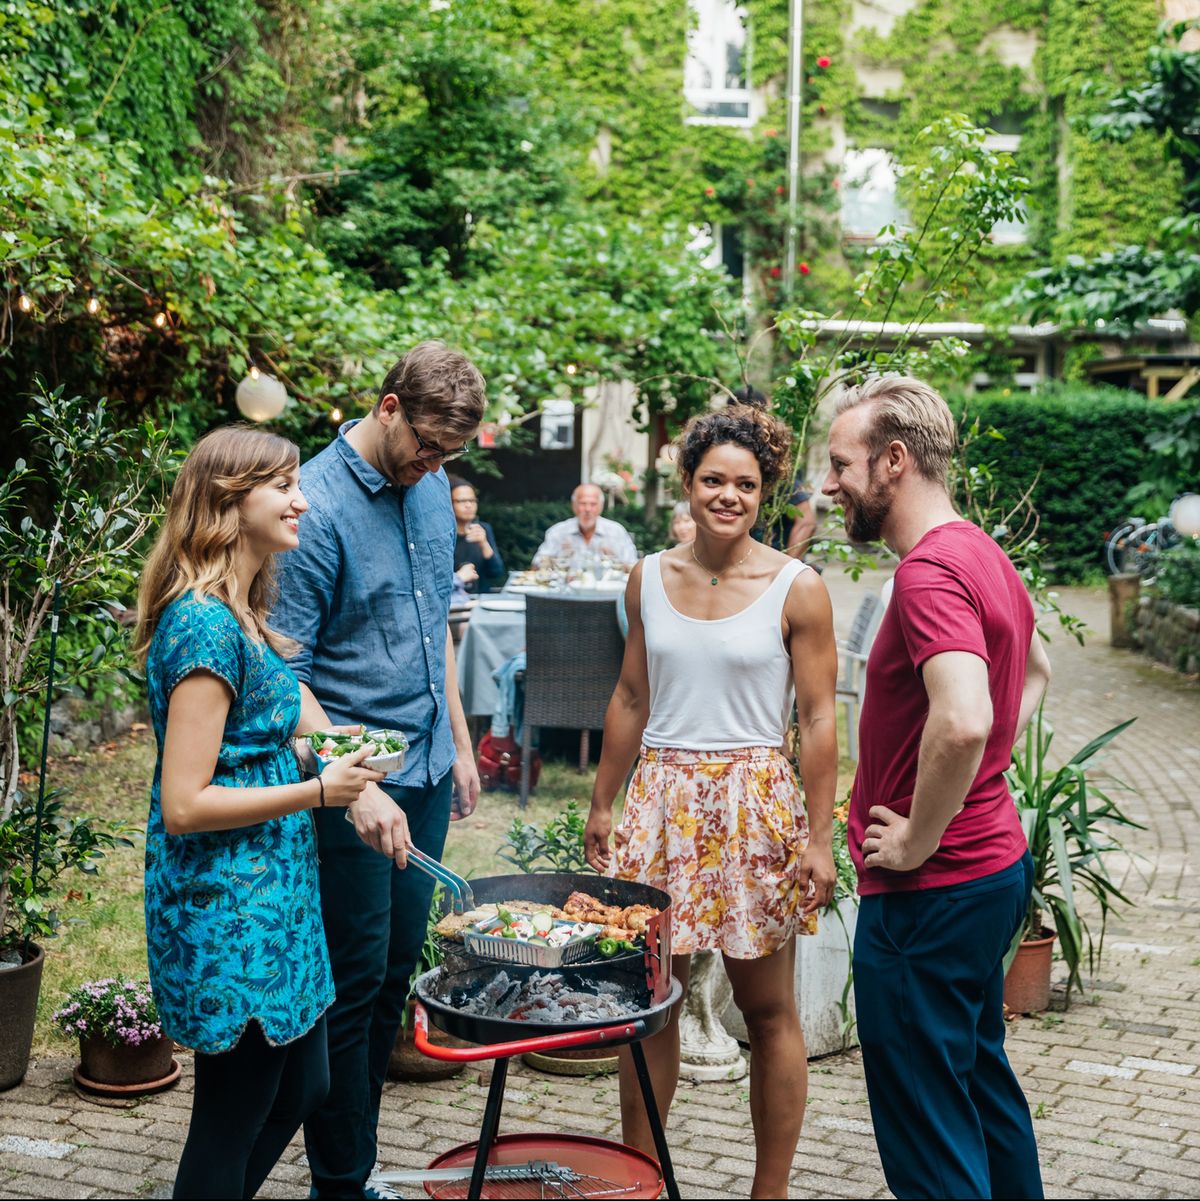 Group Of Friends Cooking On BBQ In Courtyard